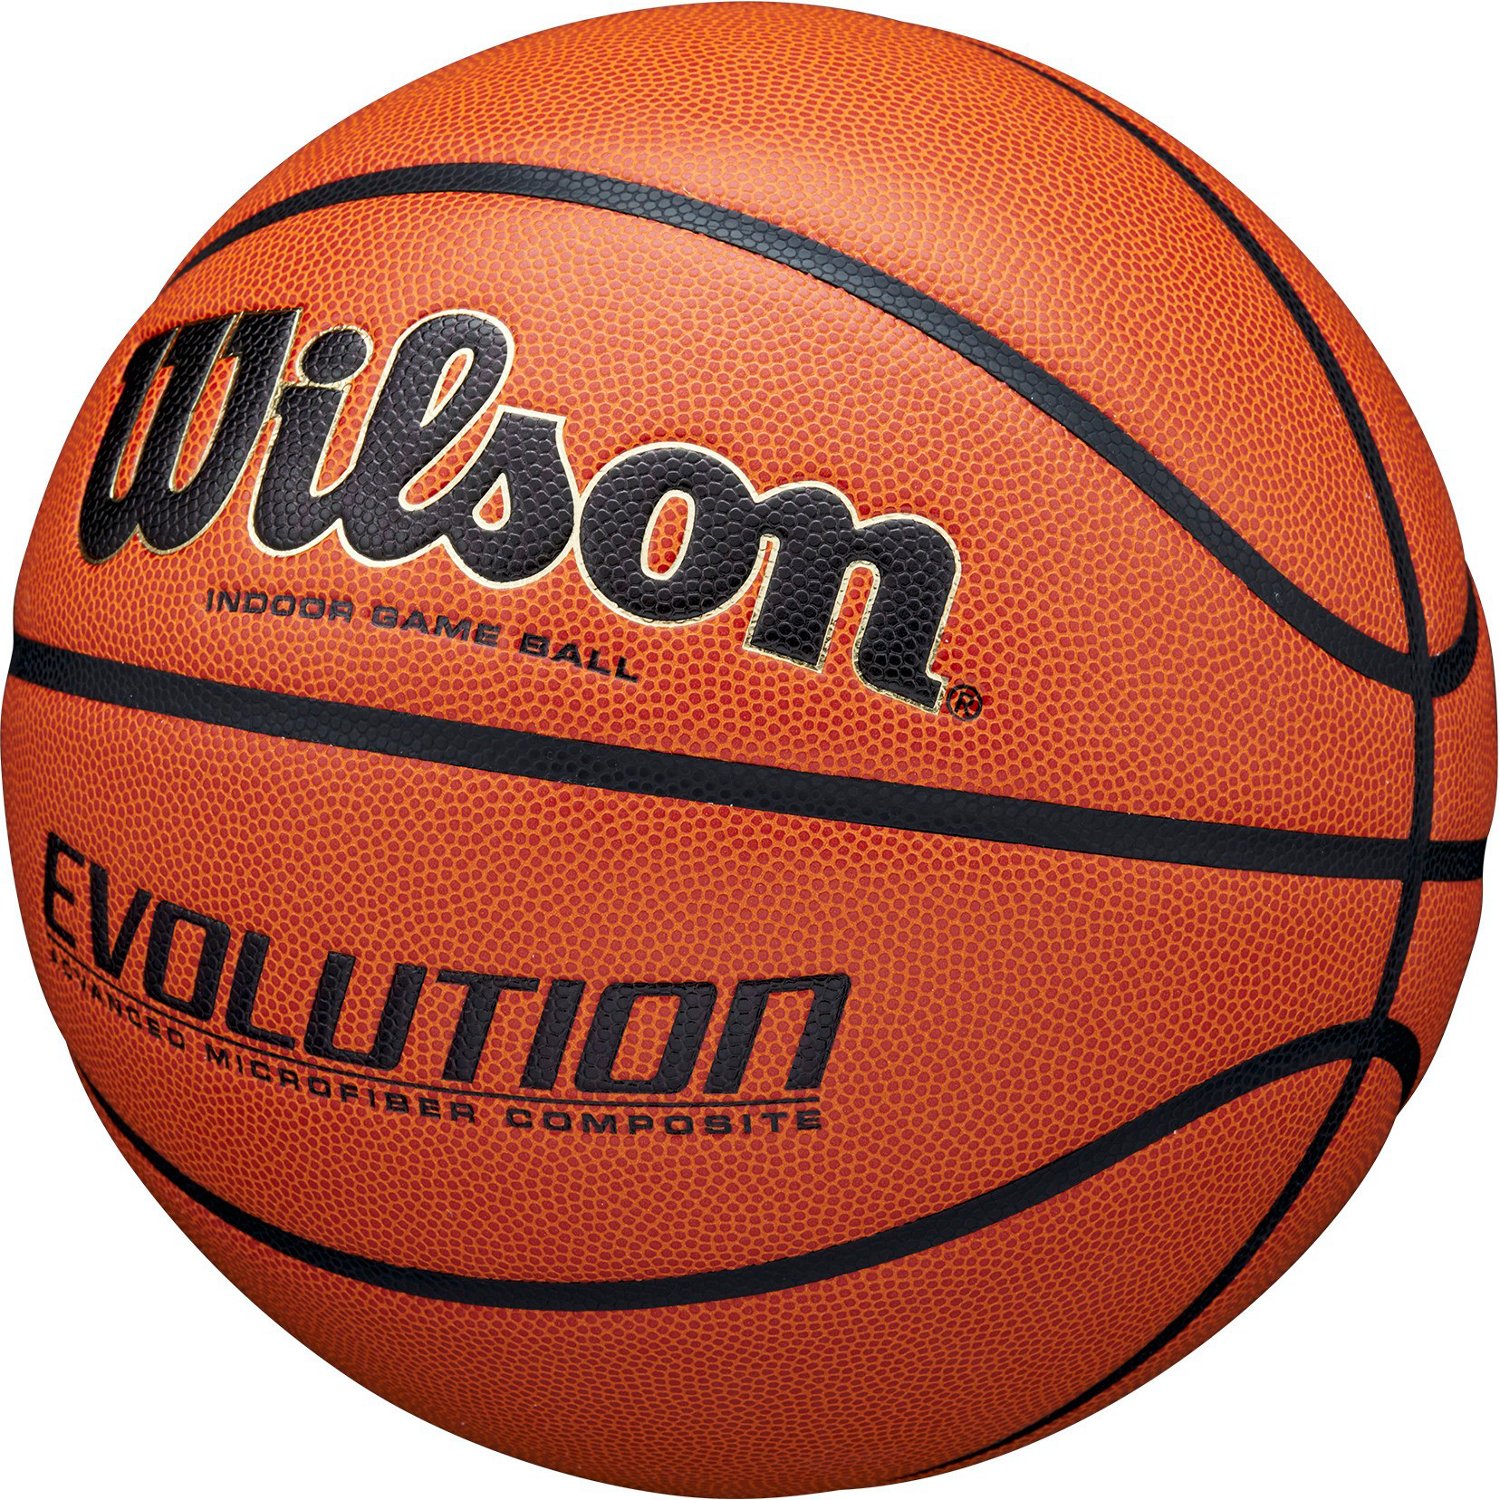 Wilson Evolution Indoor Basketball | Free Shipping at Academy